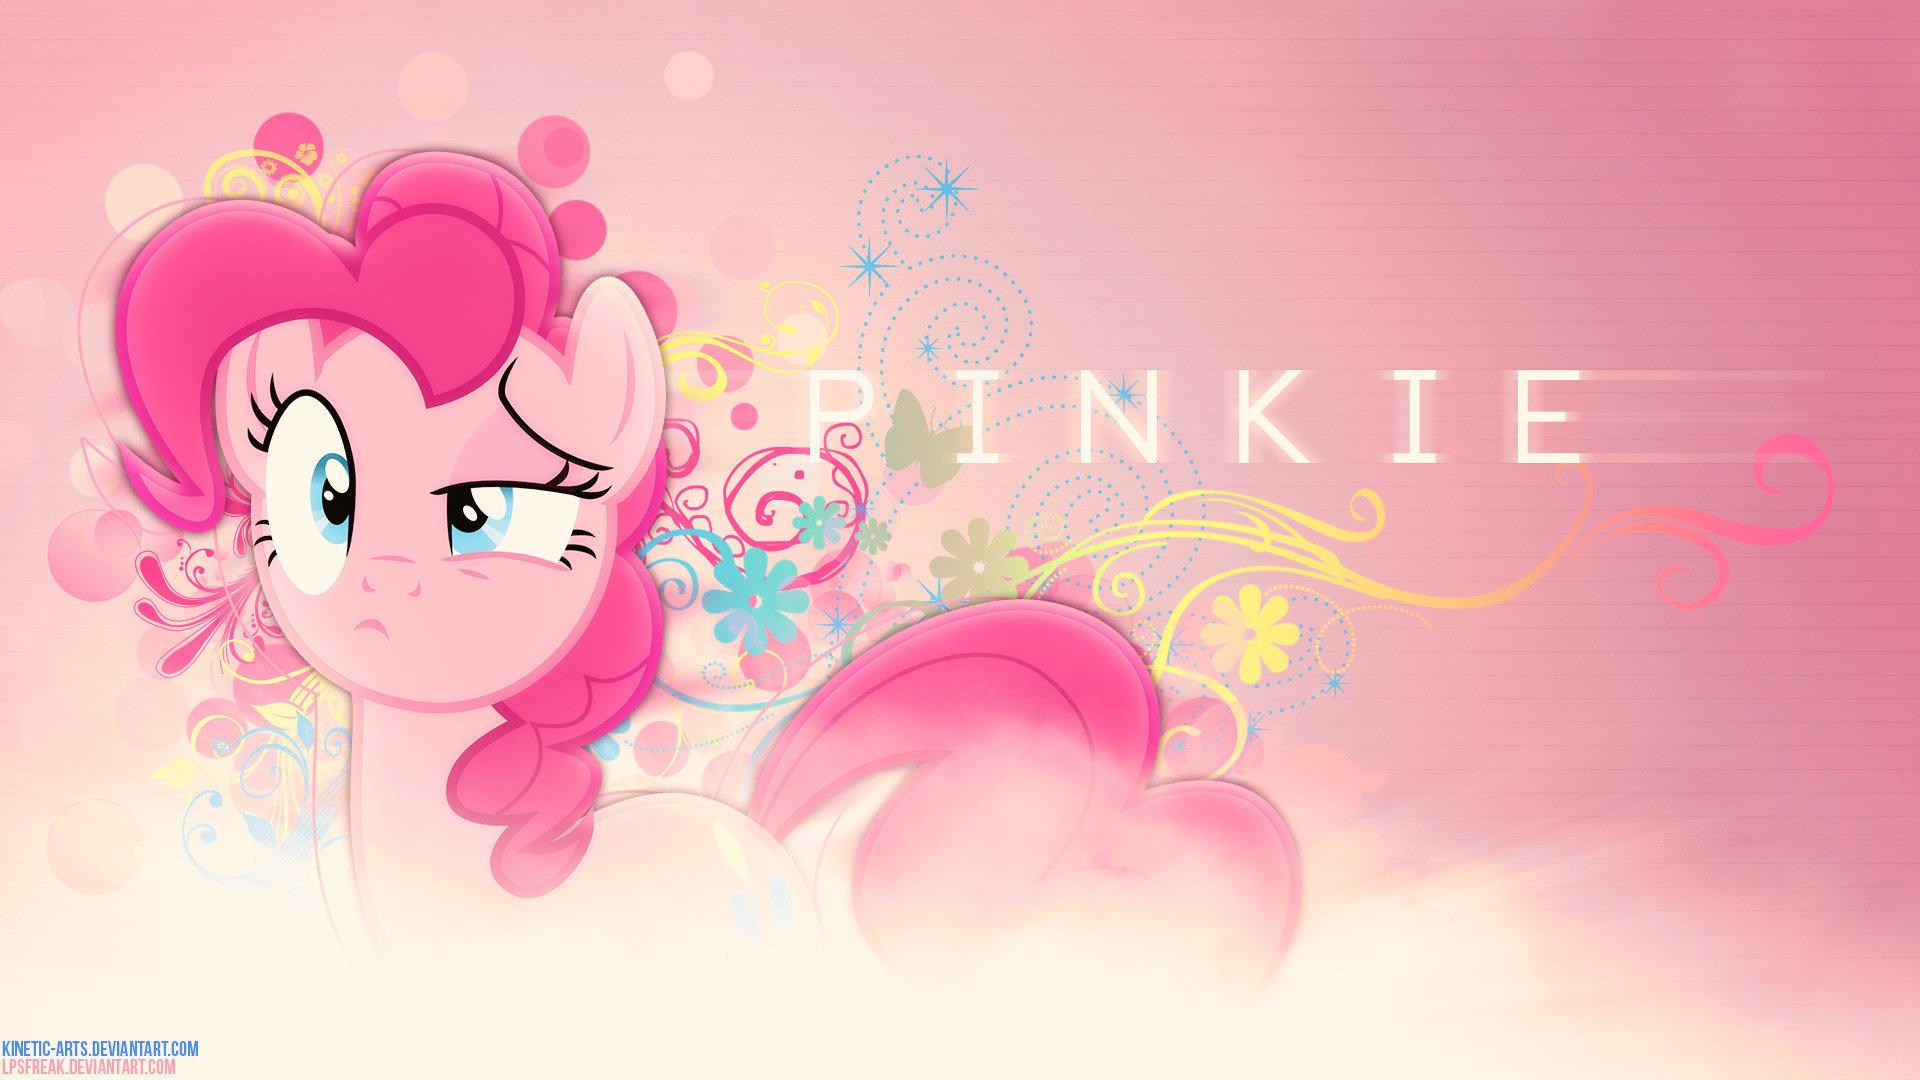 Awesome Pinkie Pie free background for full HD 1920x1080 PC